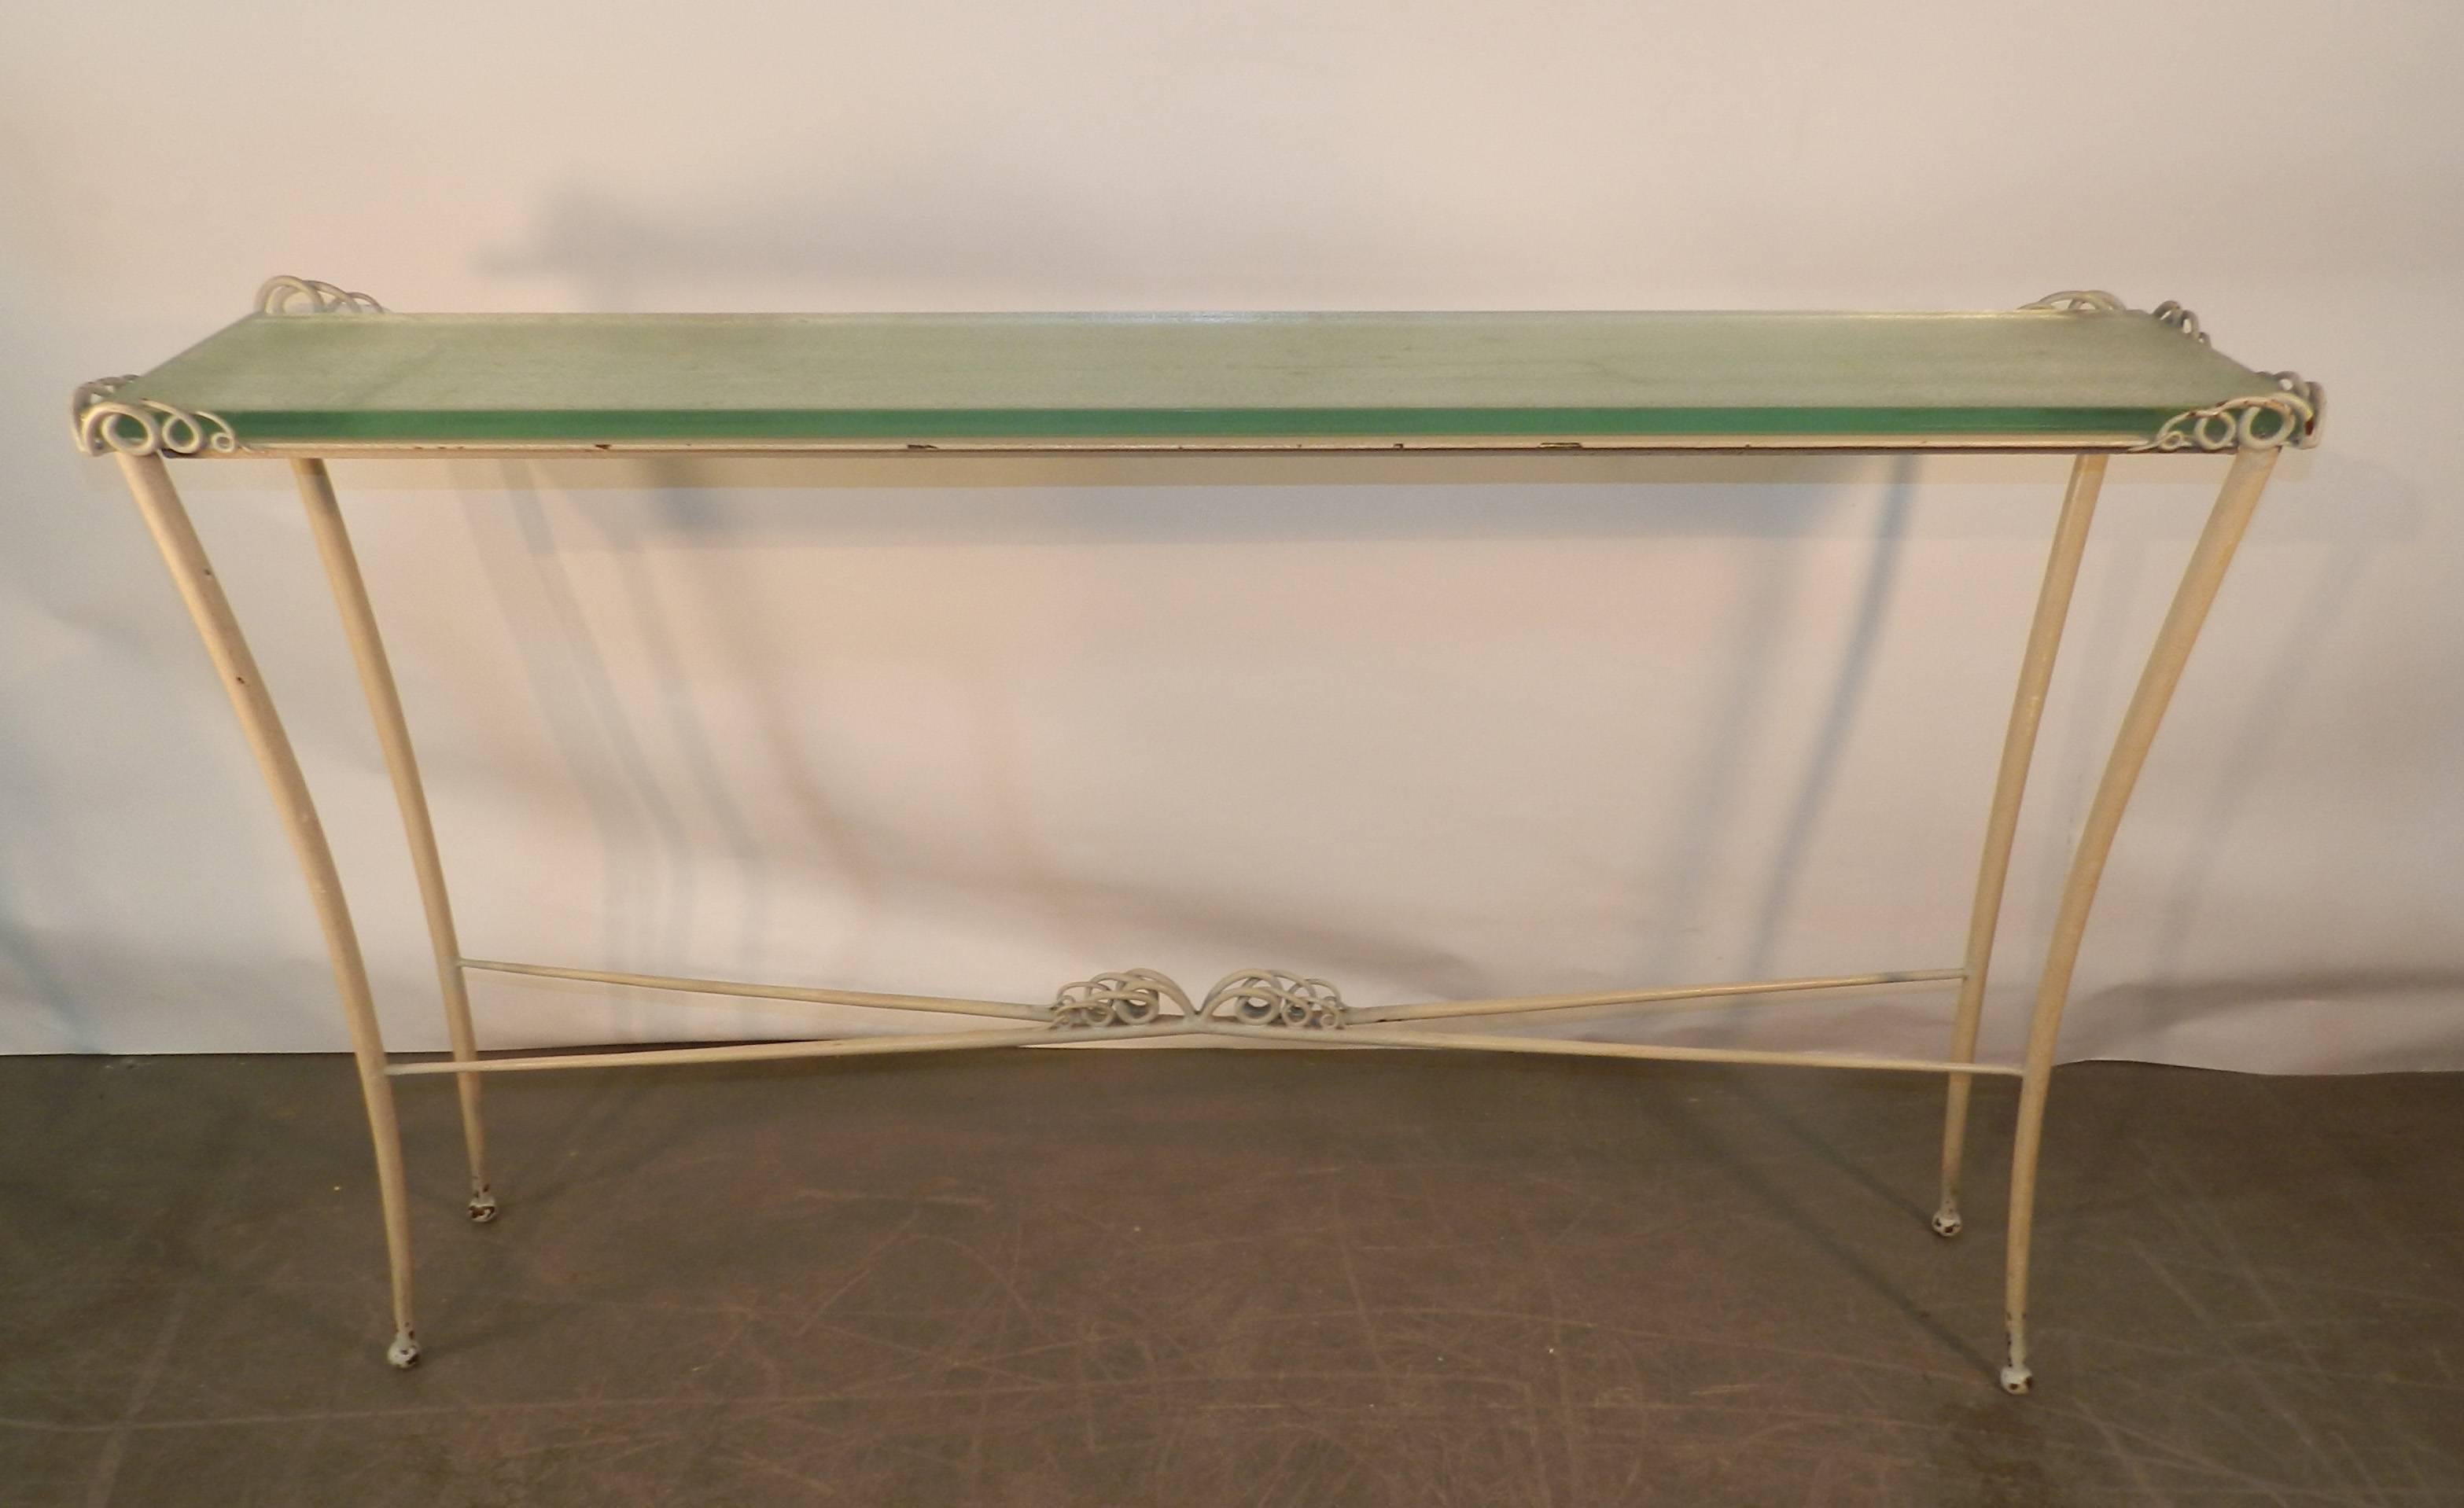 Art Deco console table in lacquered metal and glass Saint Gobain,
circa 1940-1950.
Small shots under the glass tray.